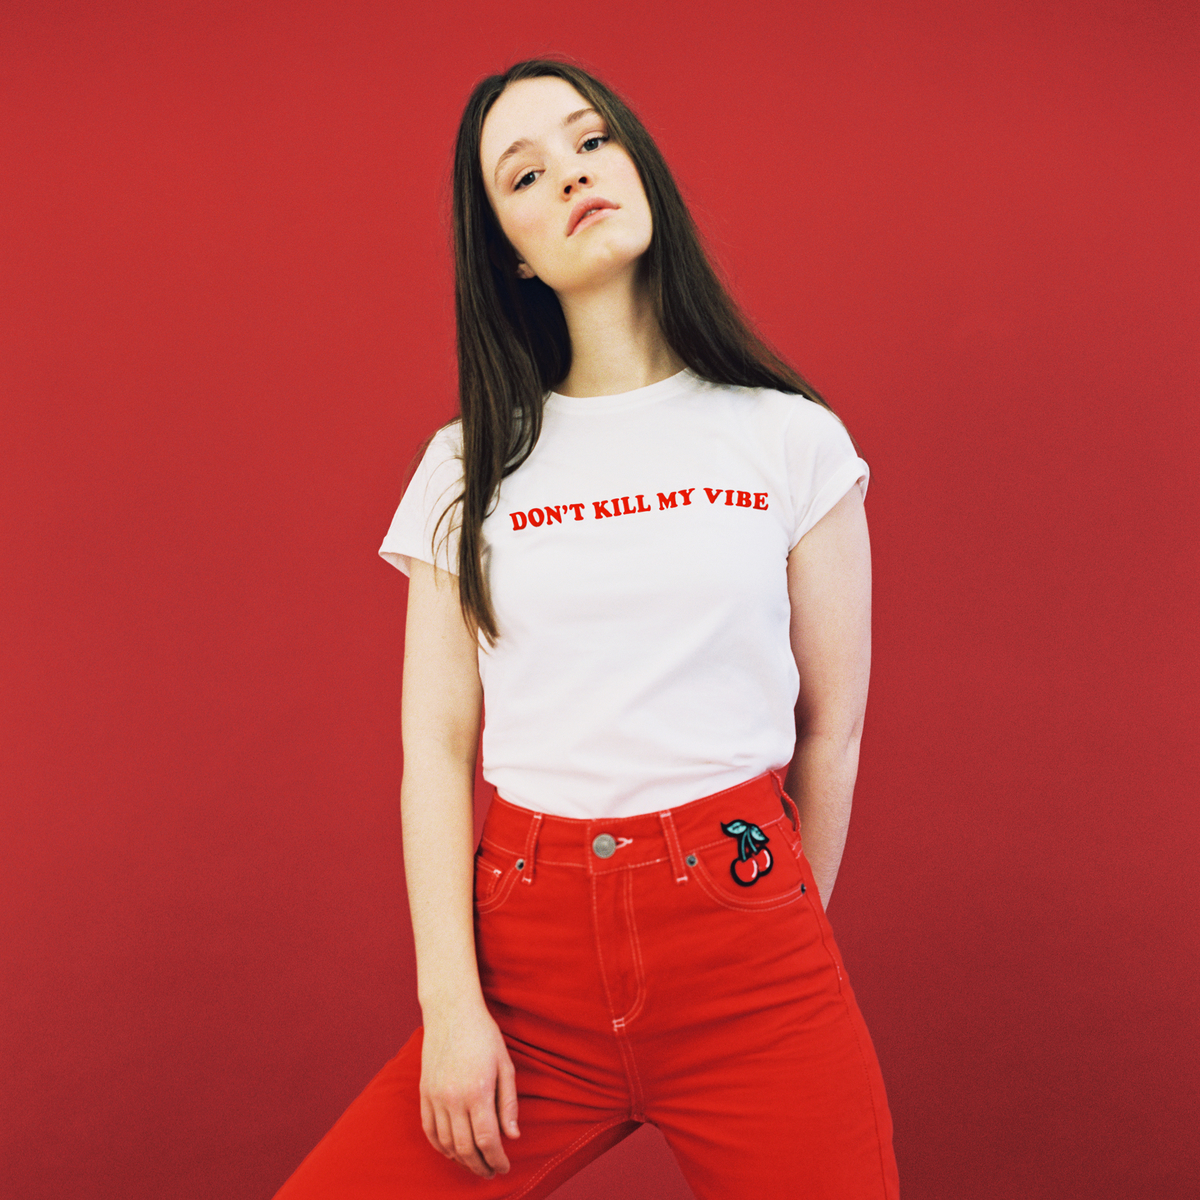 Dont Kill My Vibe by Sigrid Free Listening on SoundCloud